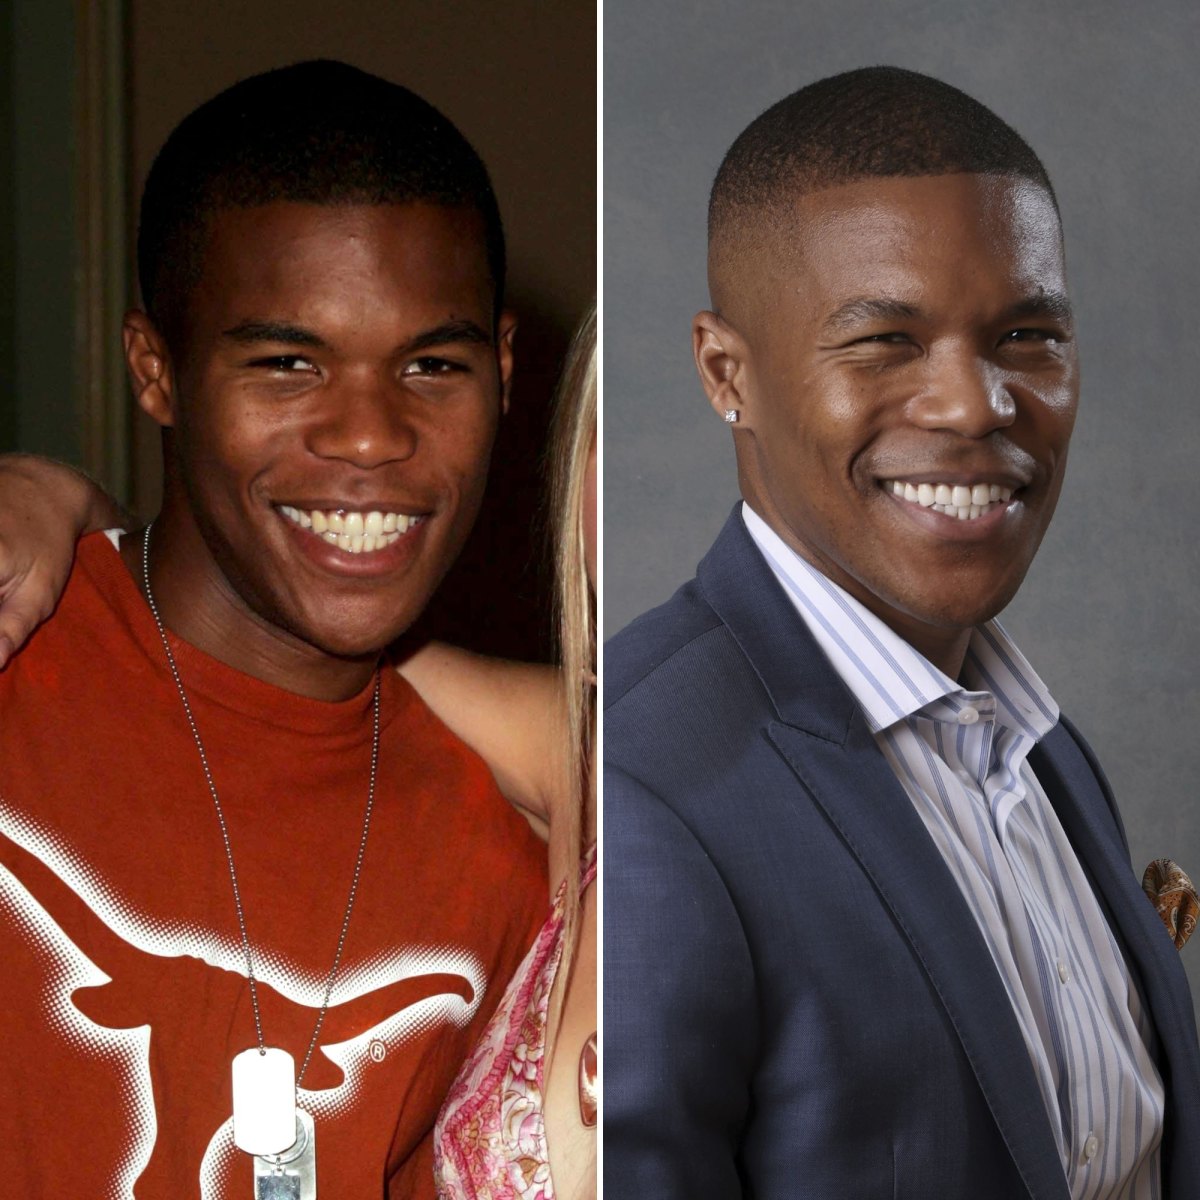 Friday Night Lights': Where Are They Now?